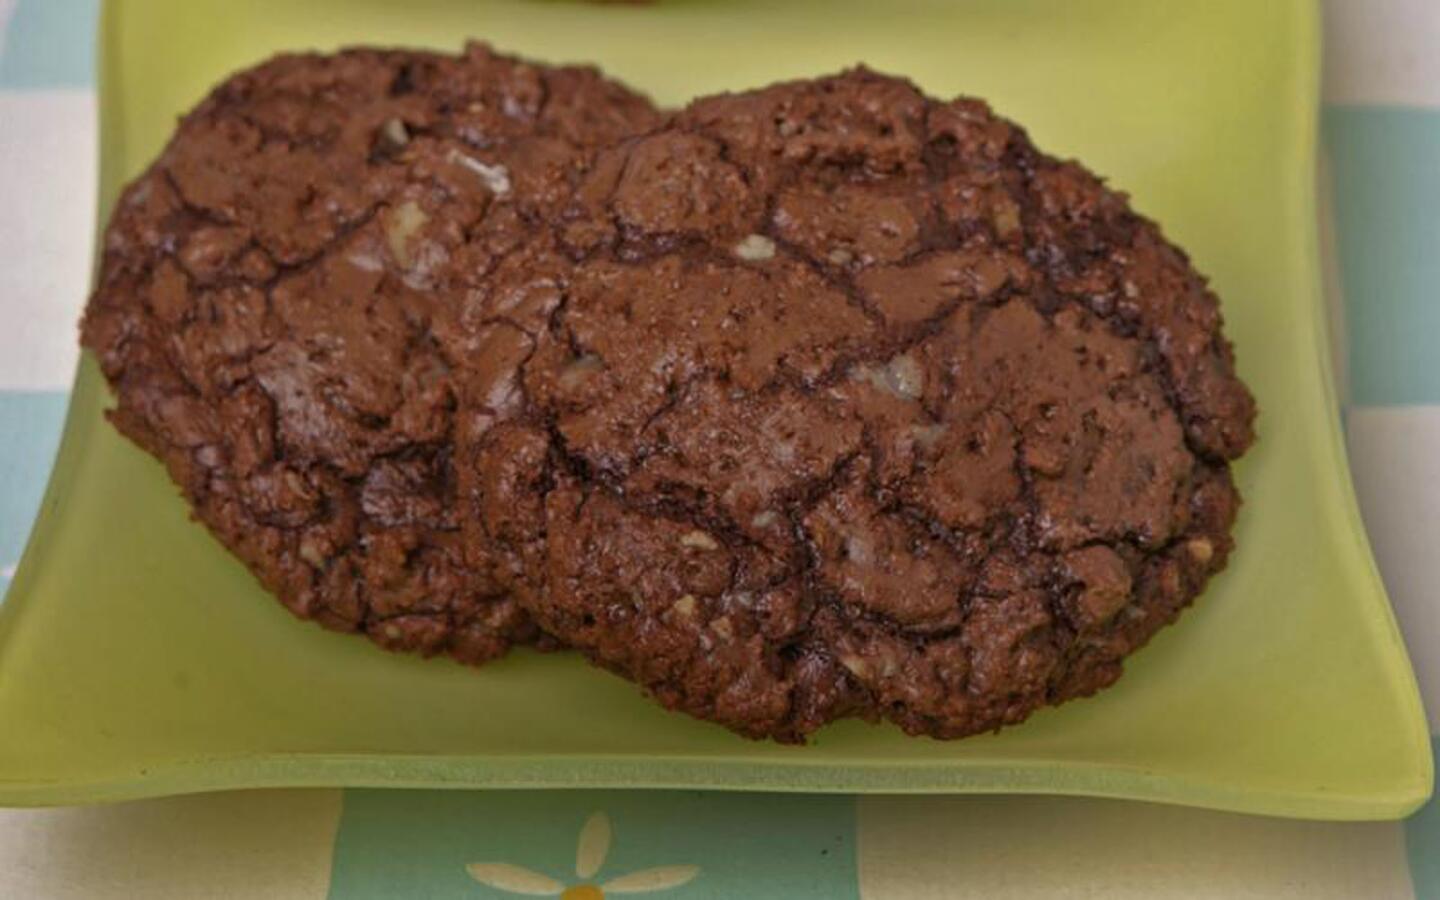 Giant chocolate cookies with toffee